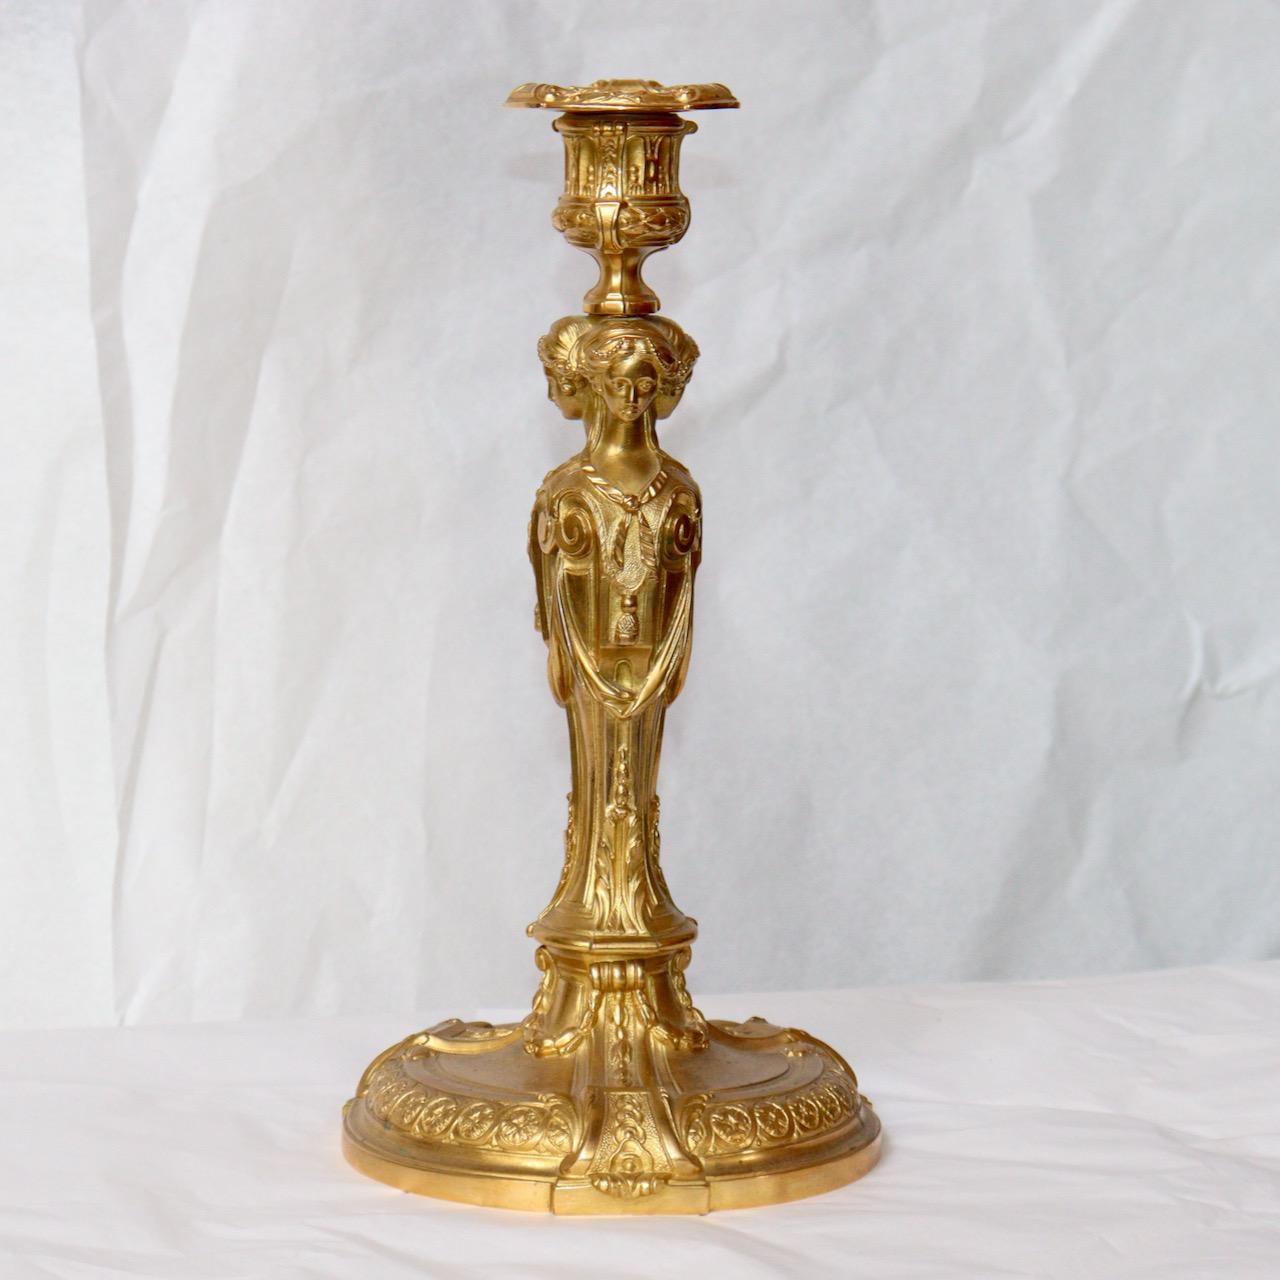 A Pair of Second Half 19th Century French Ormolu Louis XVI Style Candlesticks  3